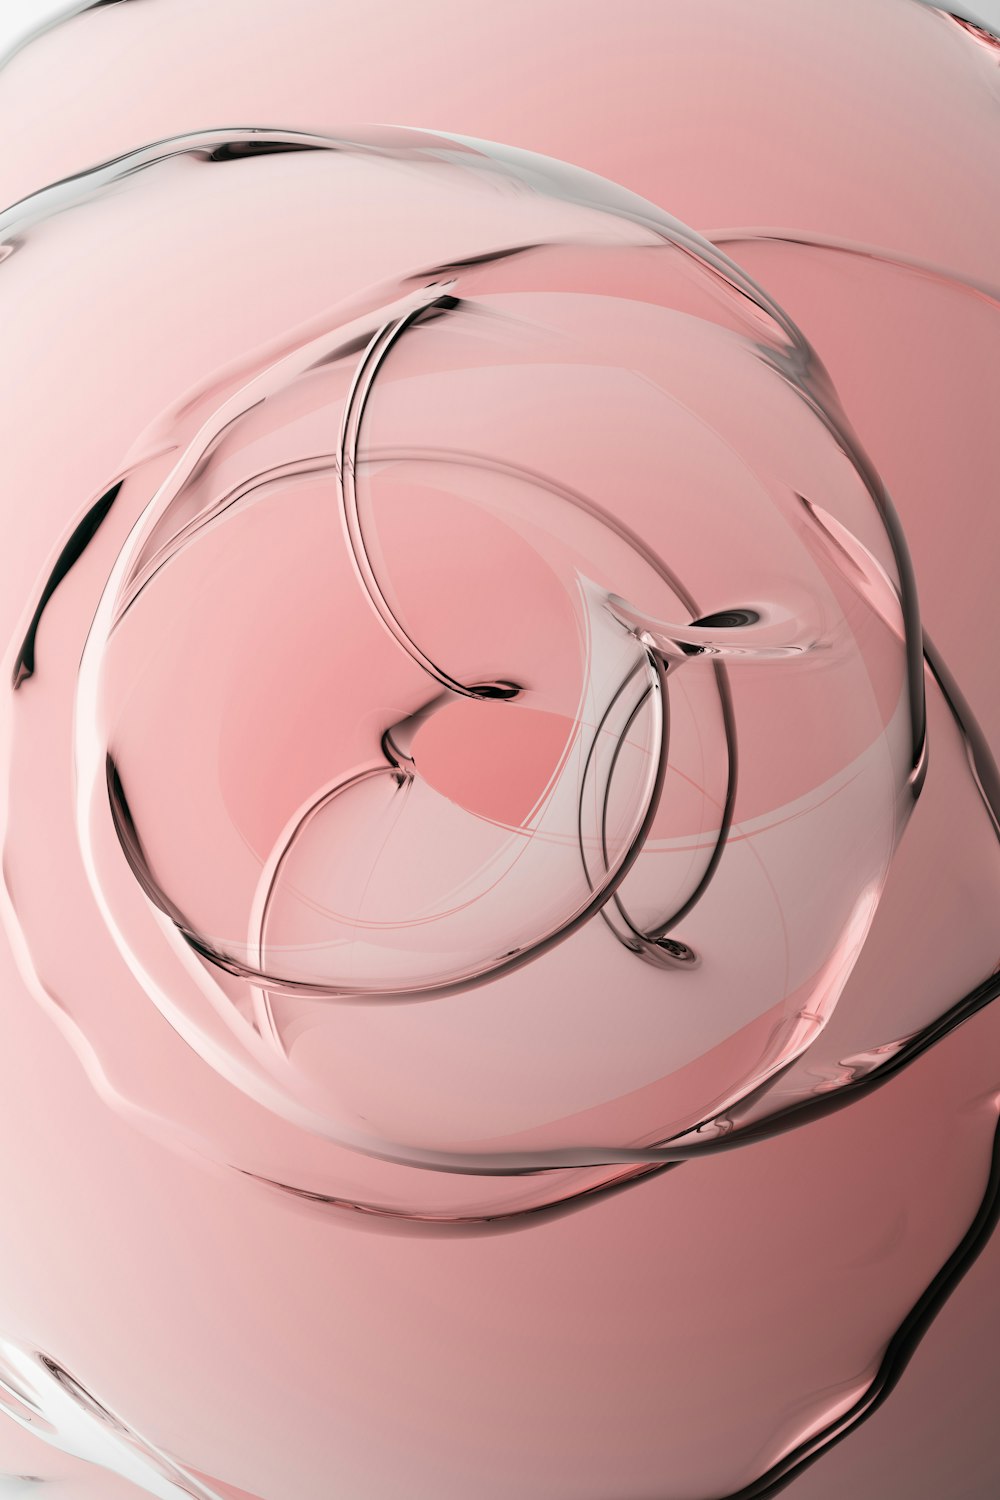 a close up of a circular object on a pink background